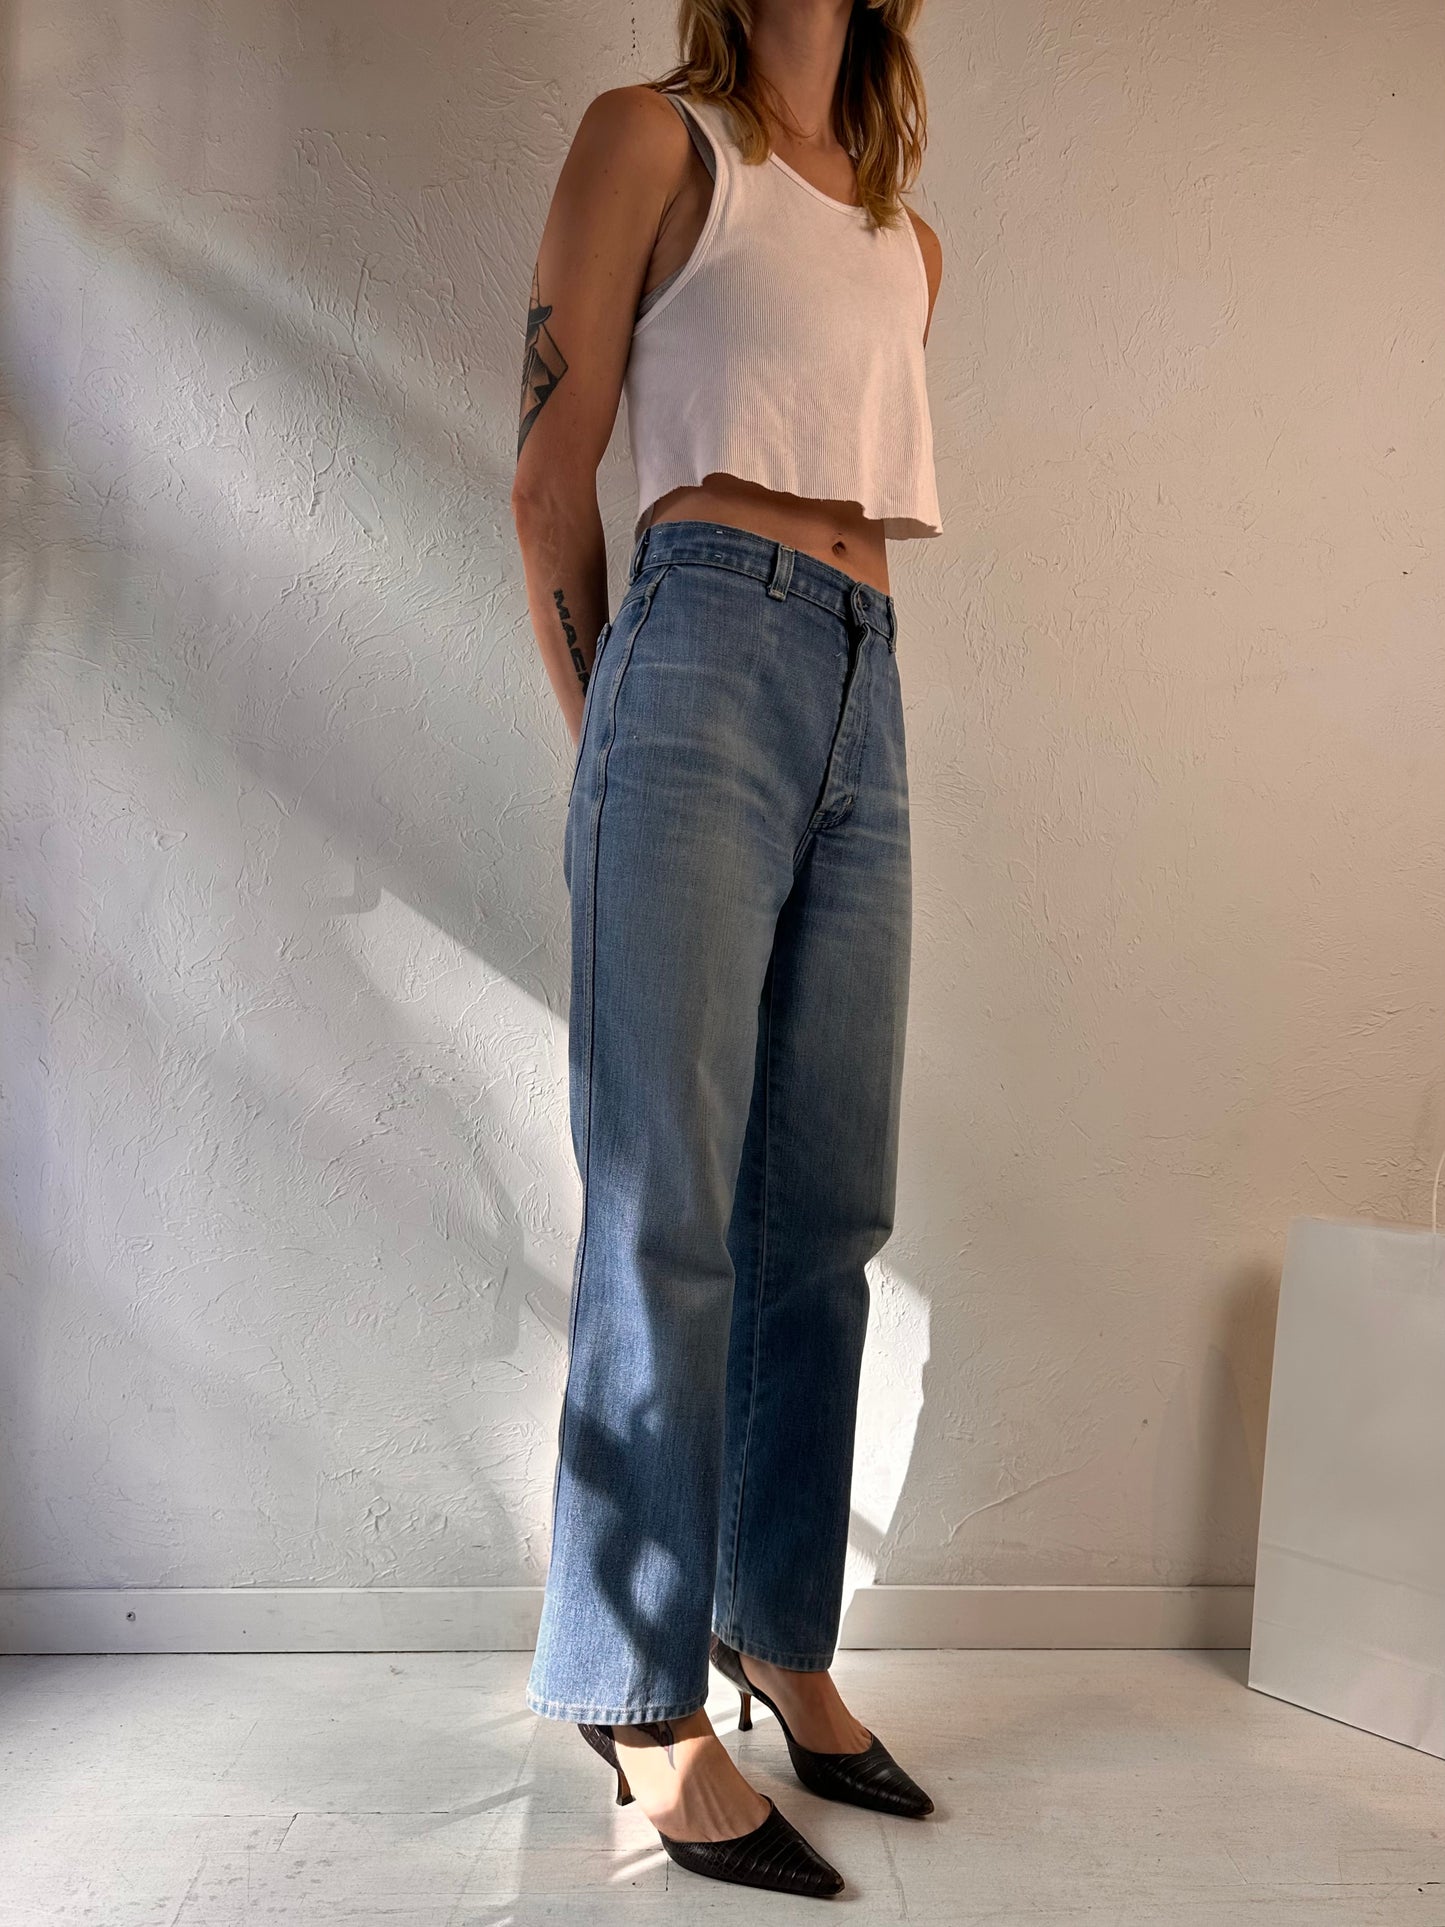 70s 'GWG' Jeans / Union Made in Canada / 27